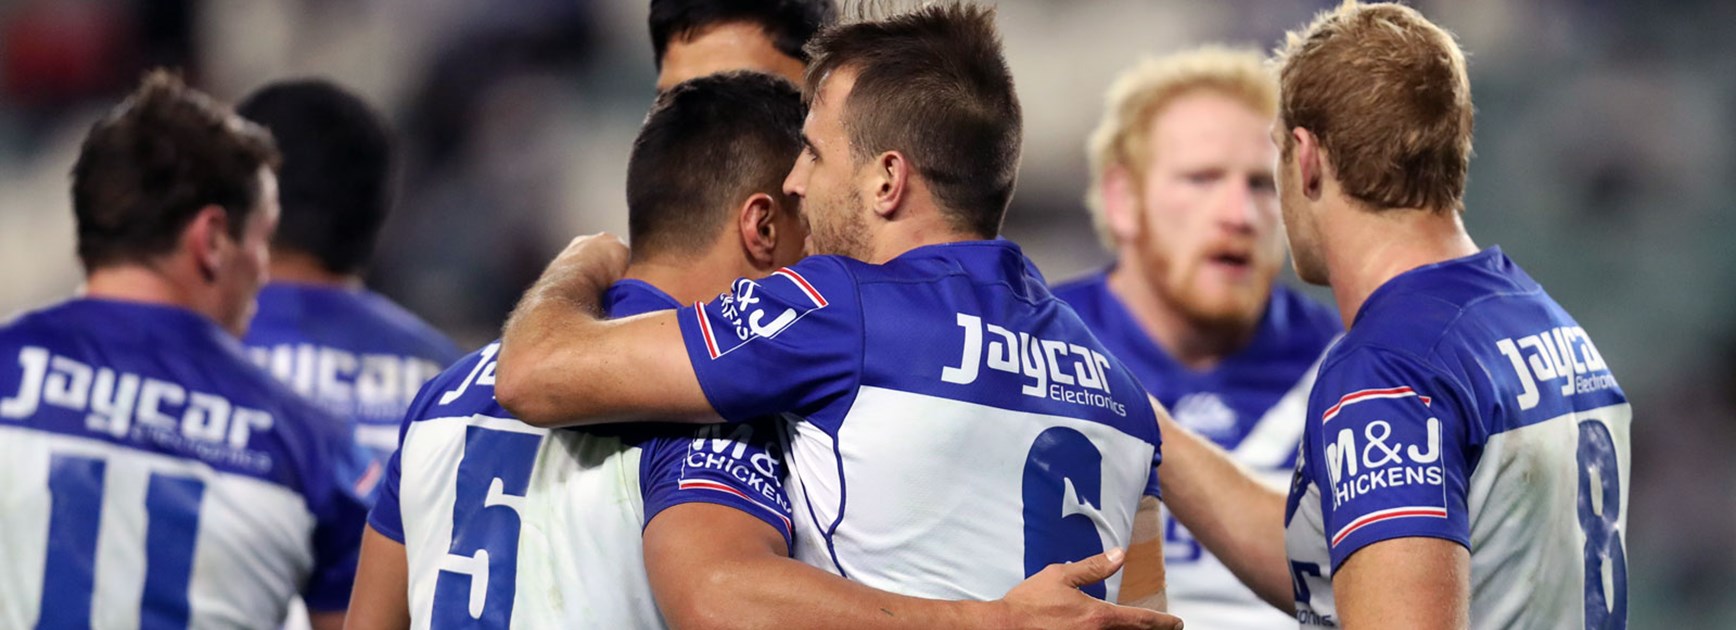 Bulldogs players celebrate their win over the Roosters in Round 17.